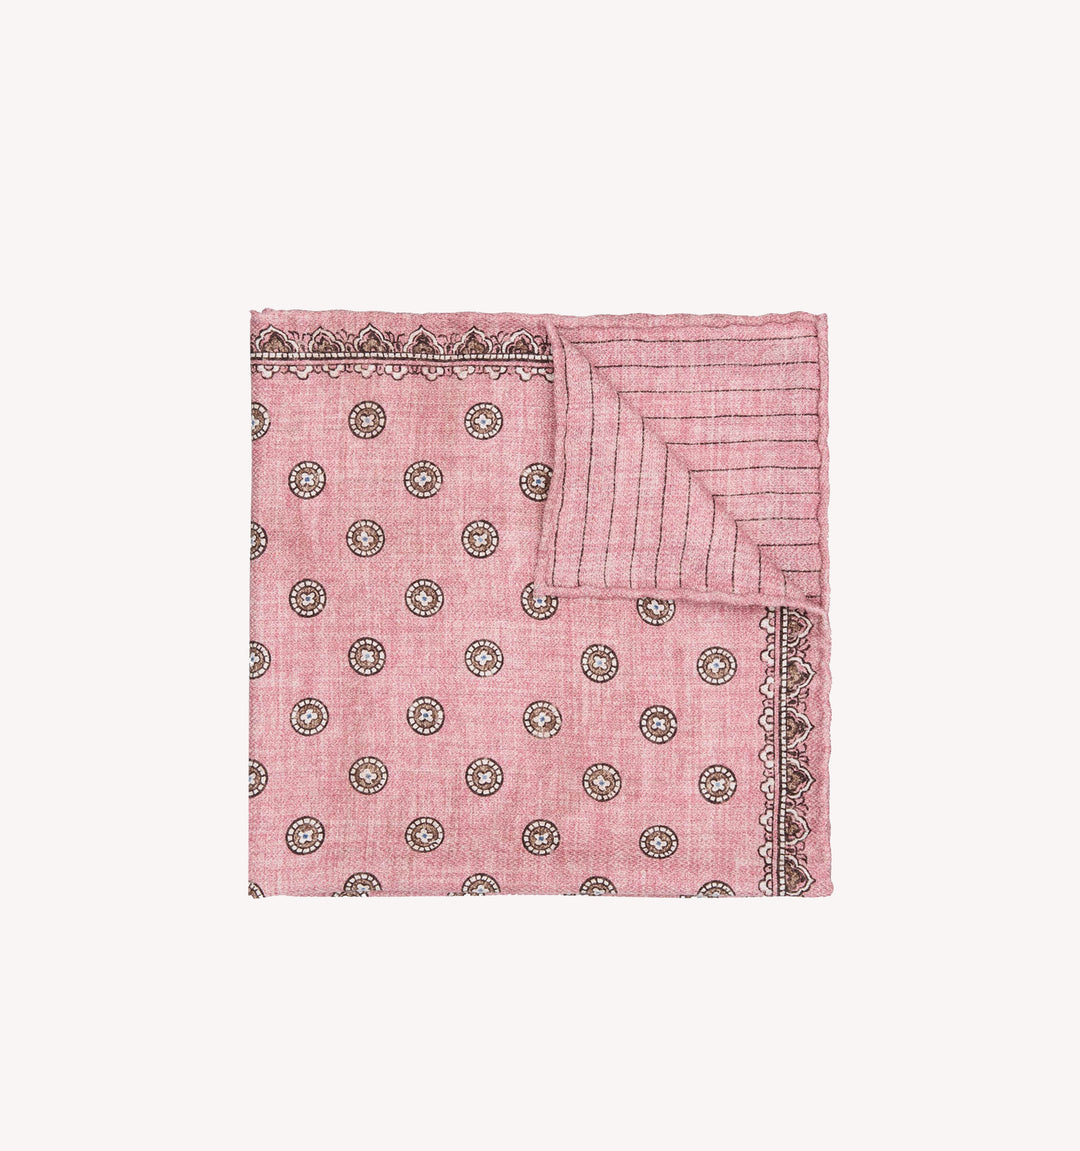 Brunello Cucinelli Dotted Reversible Pocket Square in Rose Siago